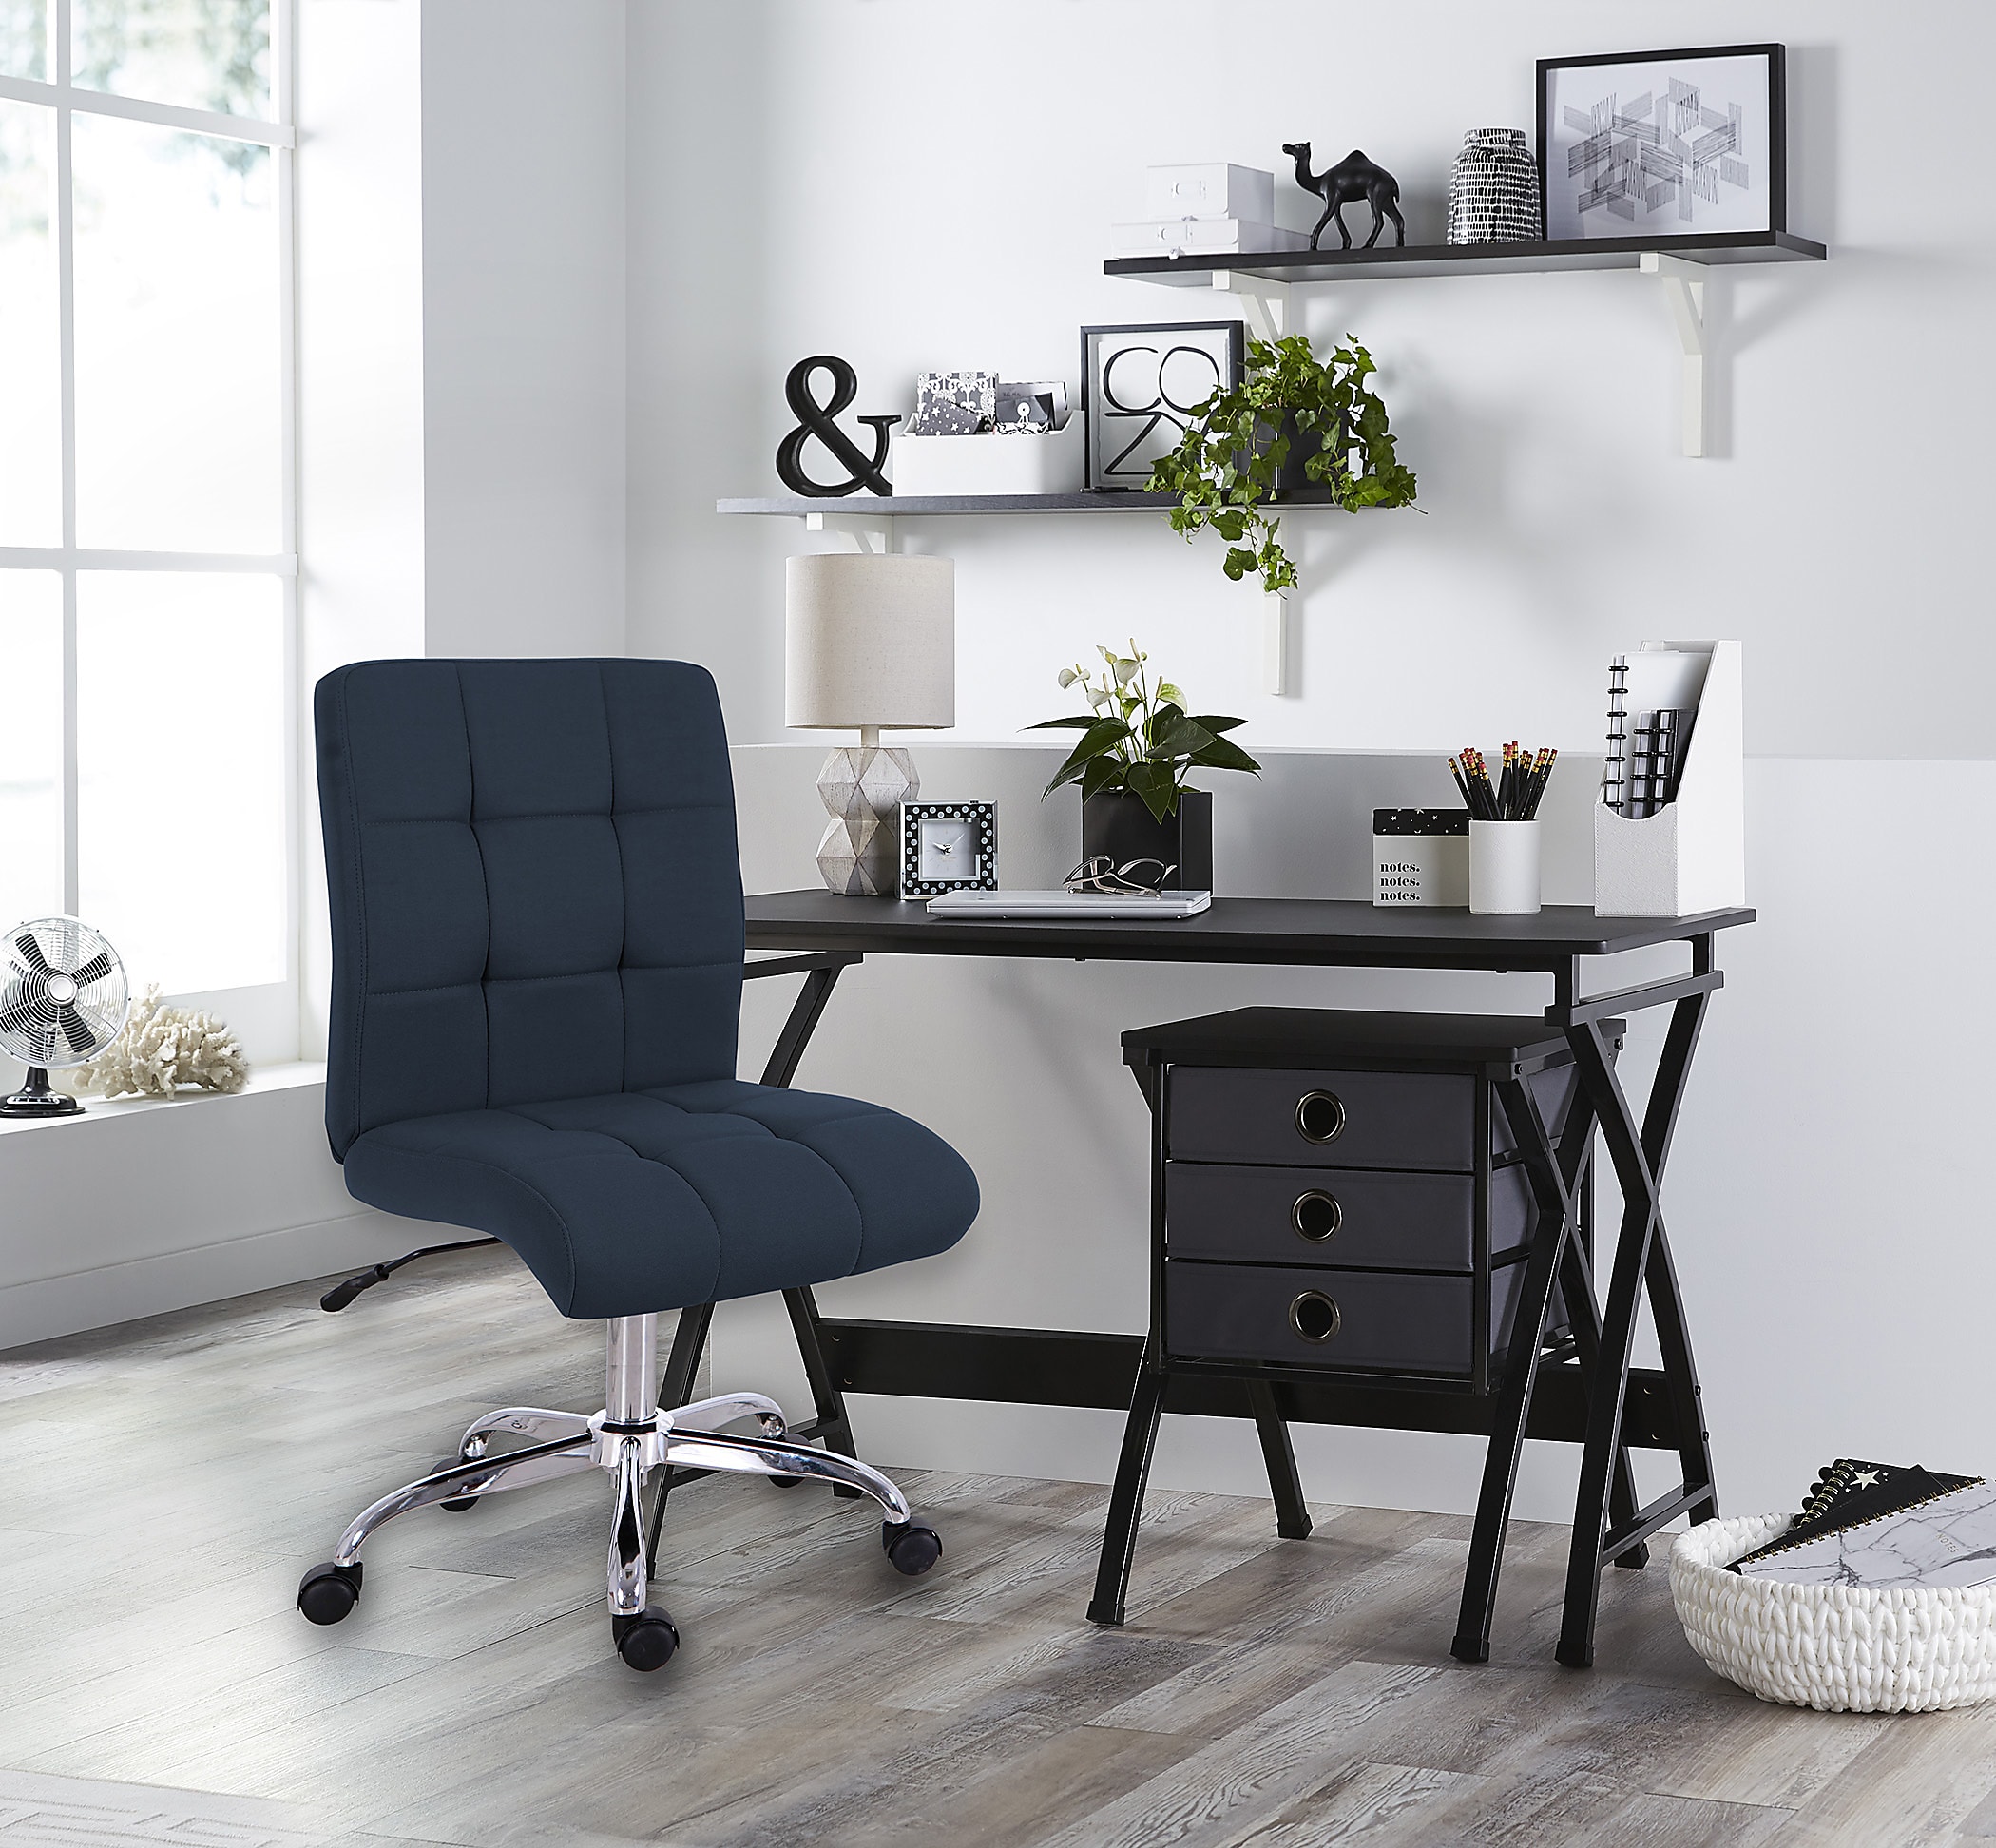 Office Depot - Save up to 50% on select Chairs